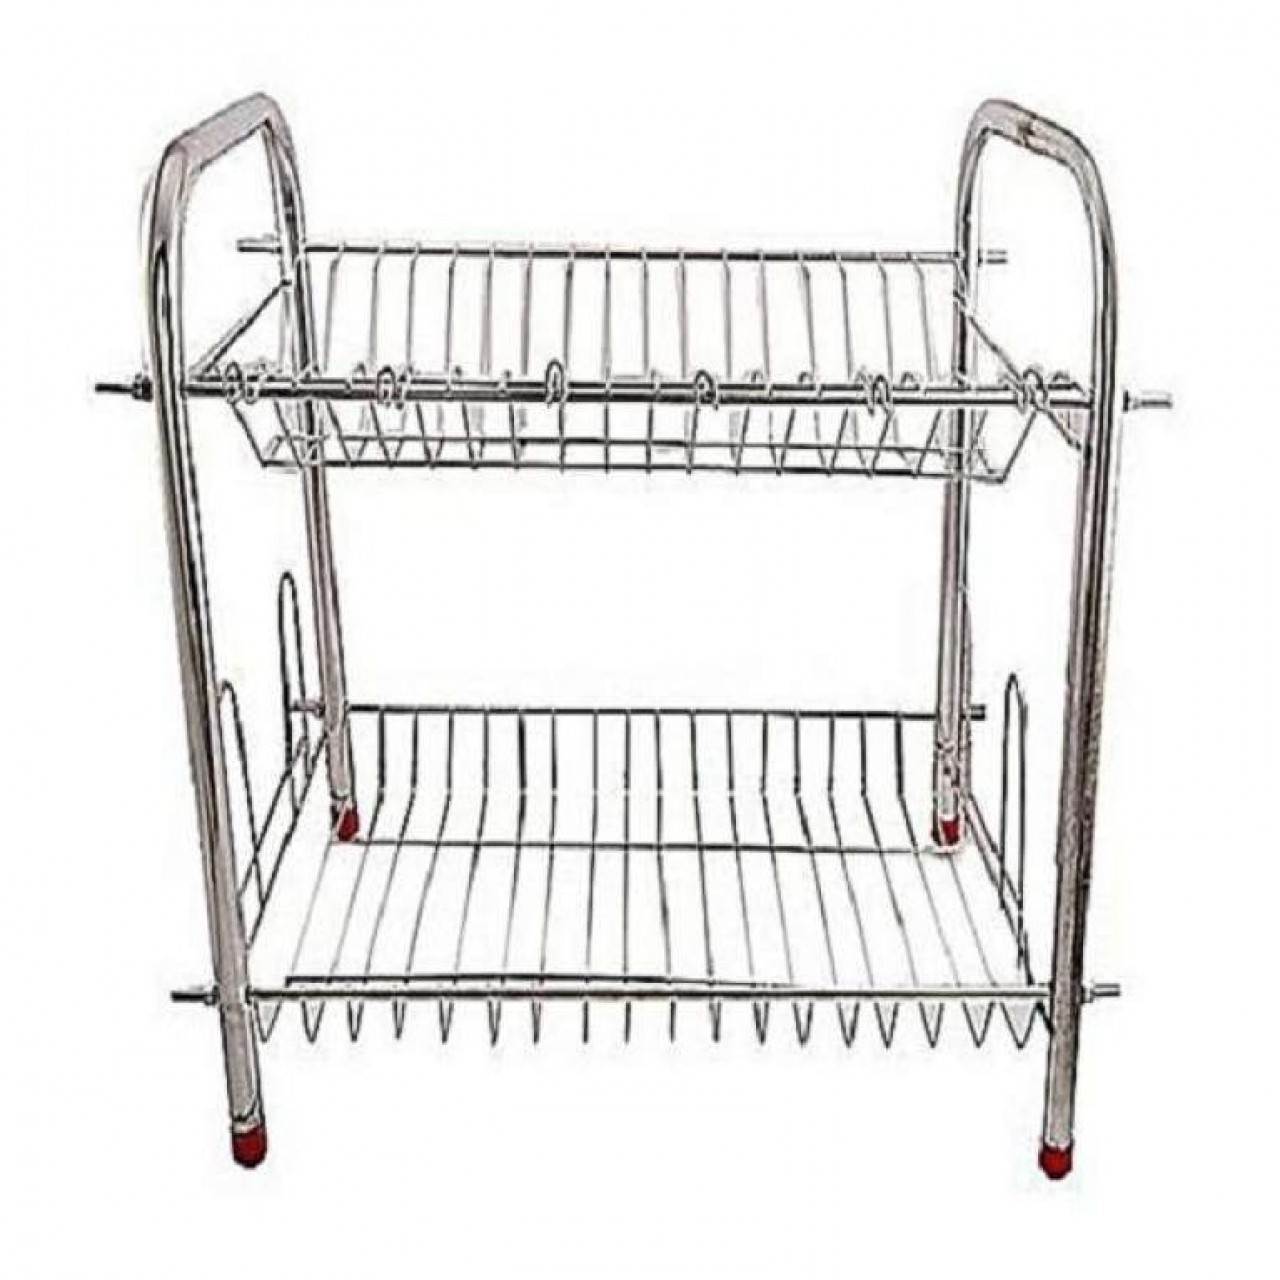 Stainless Steel Dish Rack Stand - 2 Rows - Adjustable Height - Adjustable pads - Removable Hooks